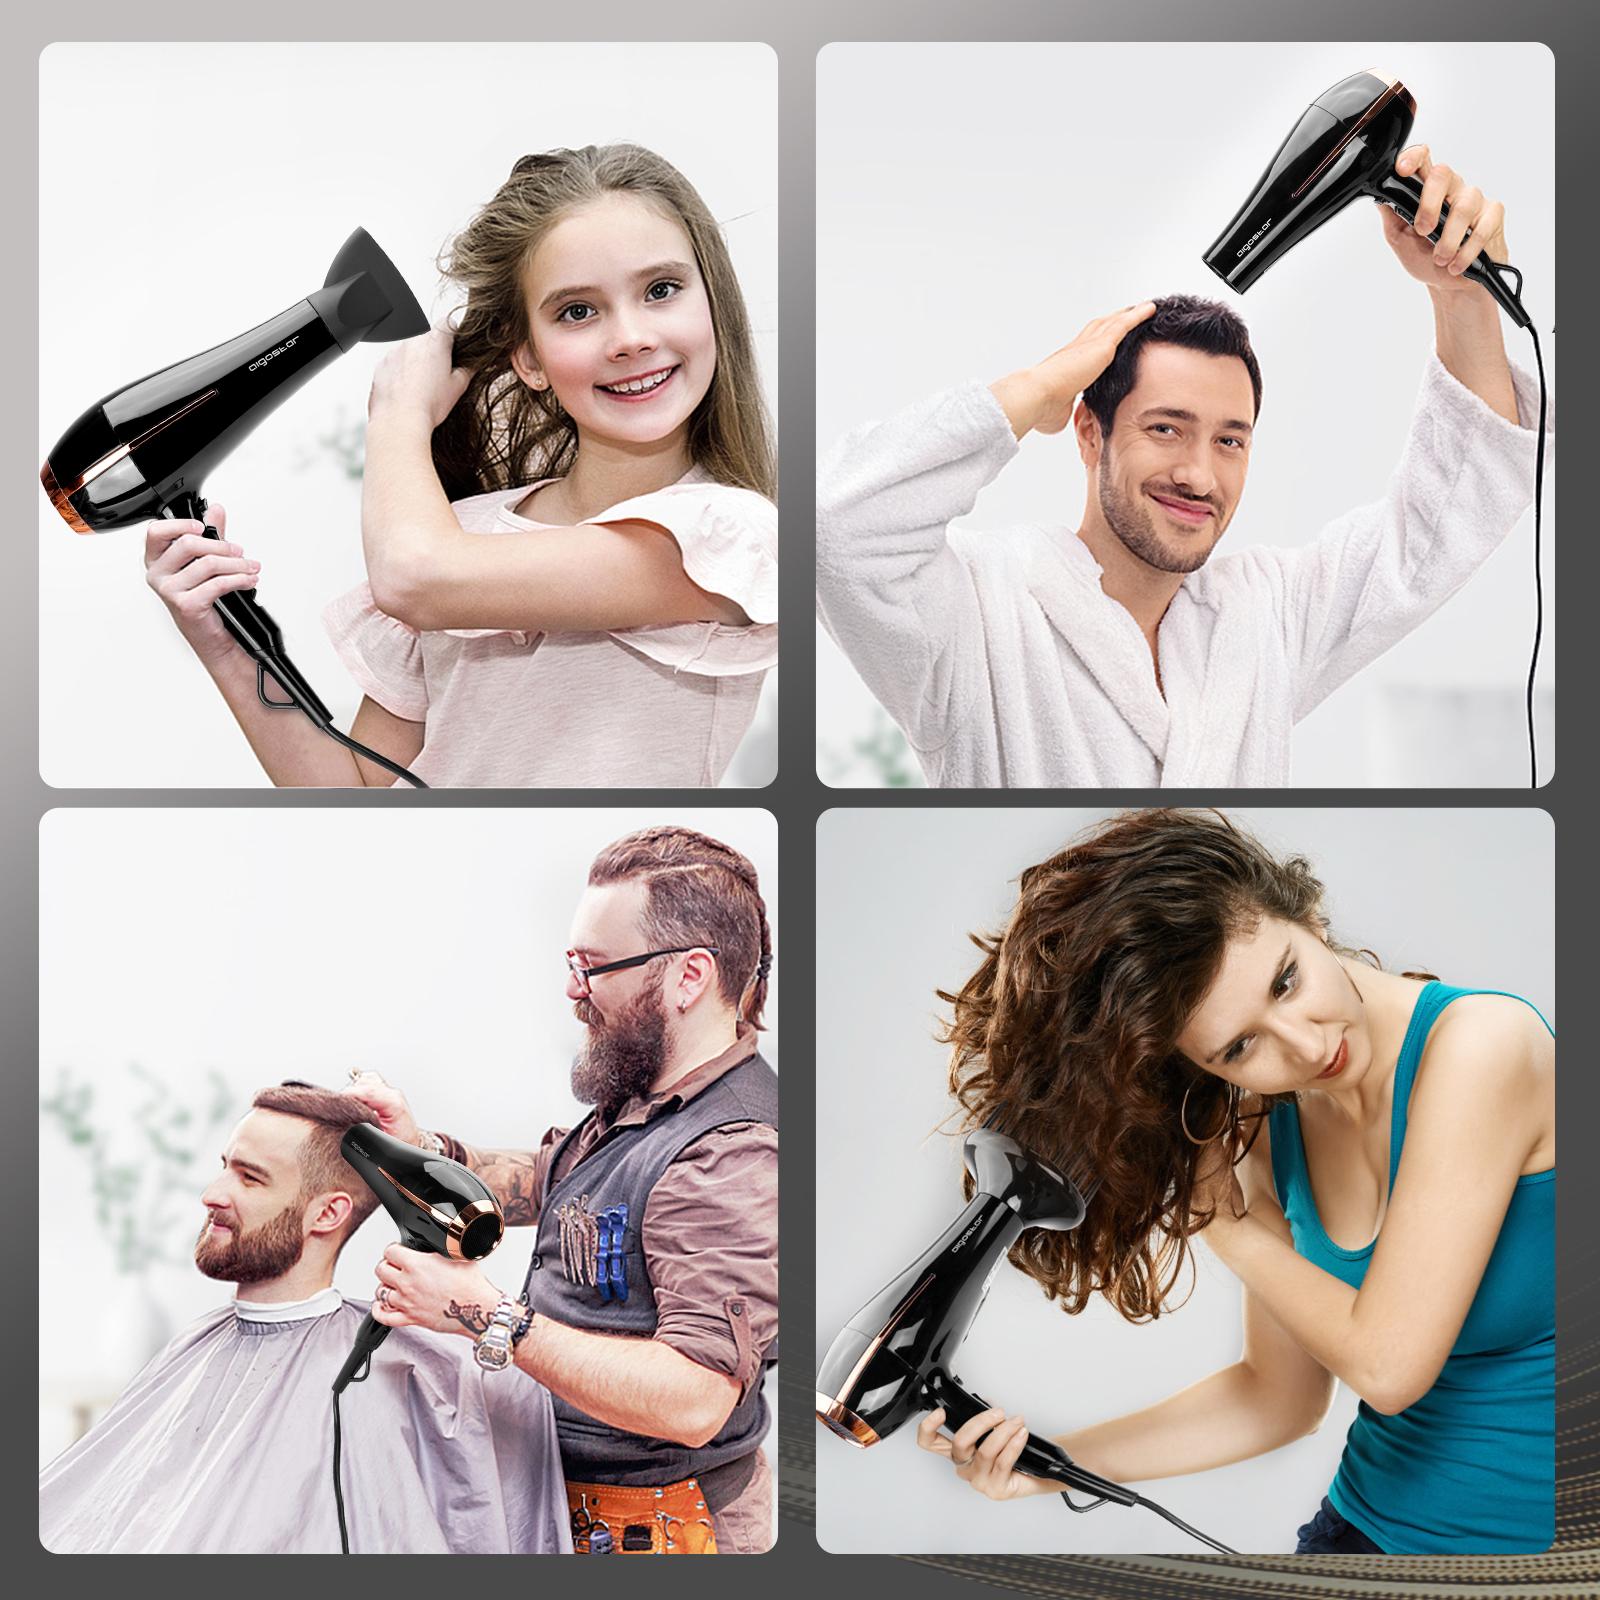 Professional hair dryer with AC motor